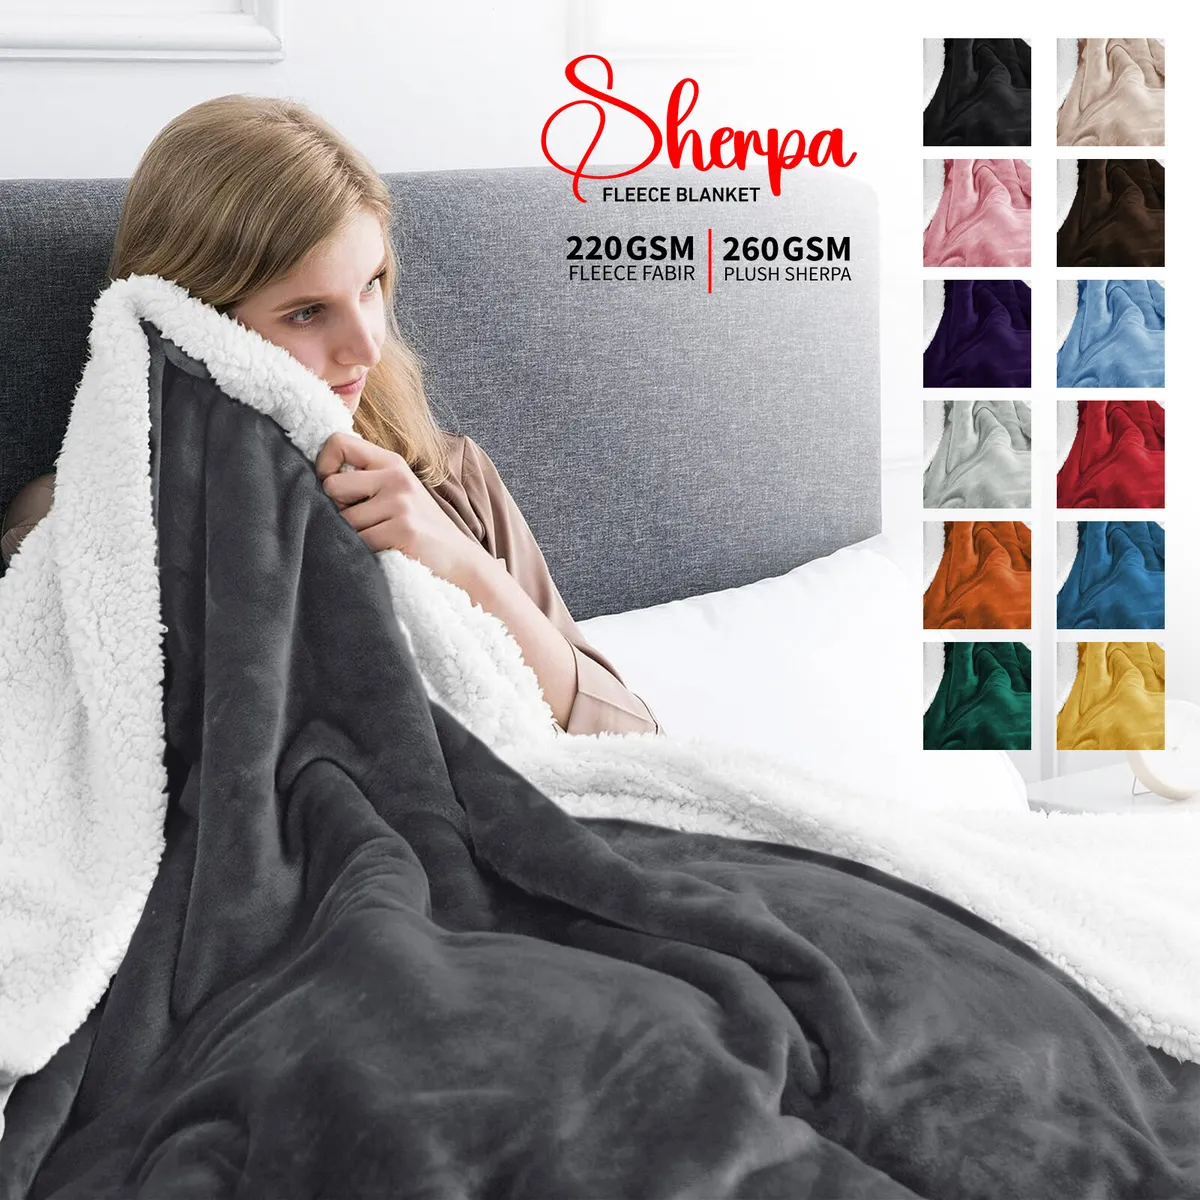 Ultra Soft Flannel Fleece Throw Blanket Double Sided Thick  Blanket,Lightweight Warm Cozy Couch Blanket,Reversible Throw Blanket 3  Pieces Bedding Set